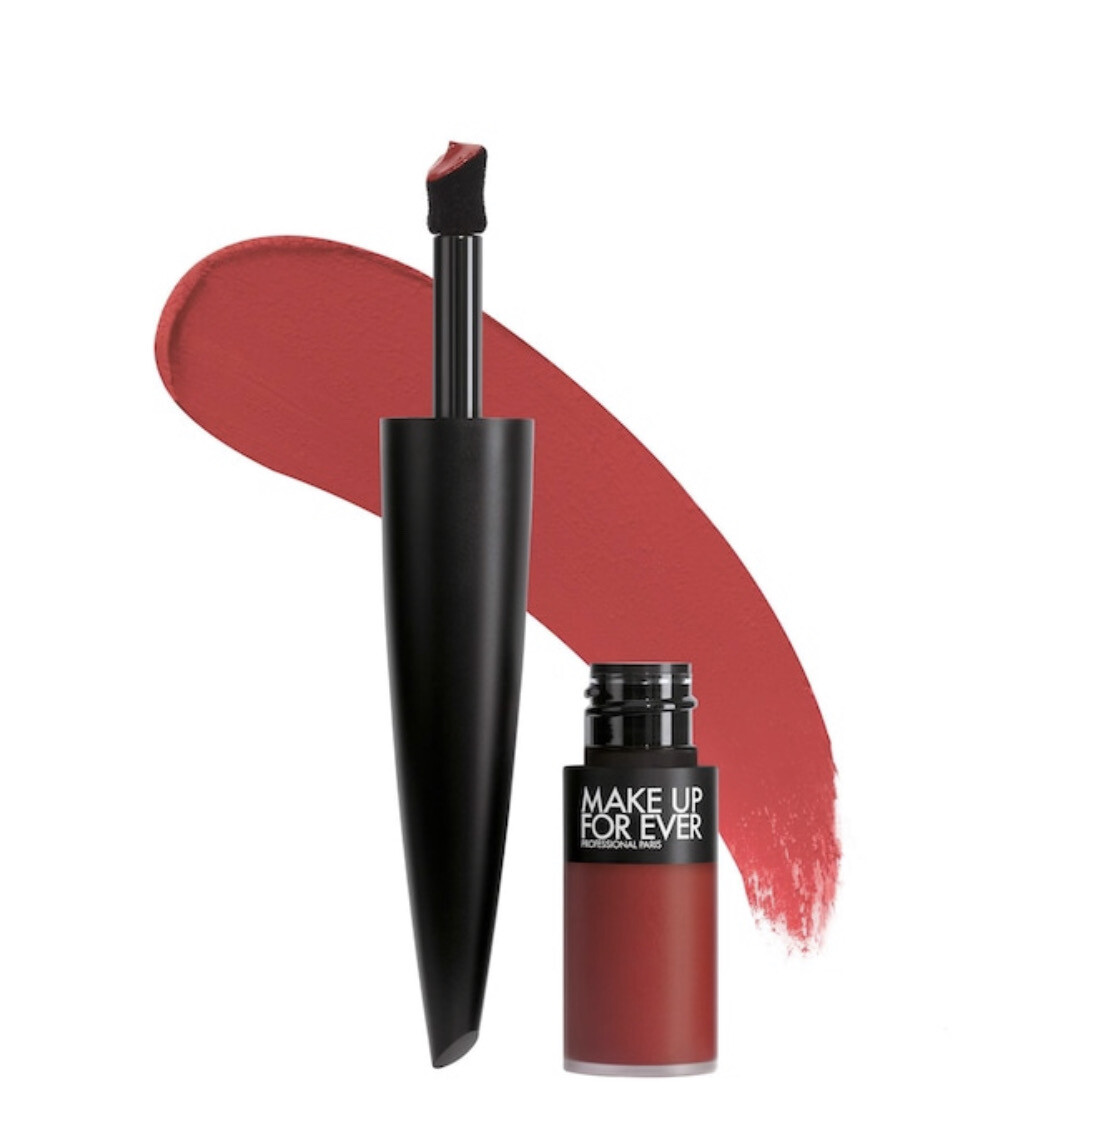 Make Up For Ever - Rouge Artist For Ever Matte 24HR Longwear Liquid Lipstick | 440 Chili For Life - deep nude rose